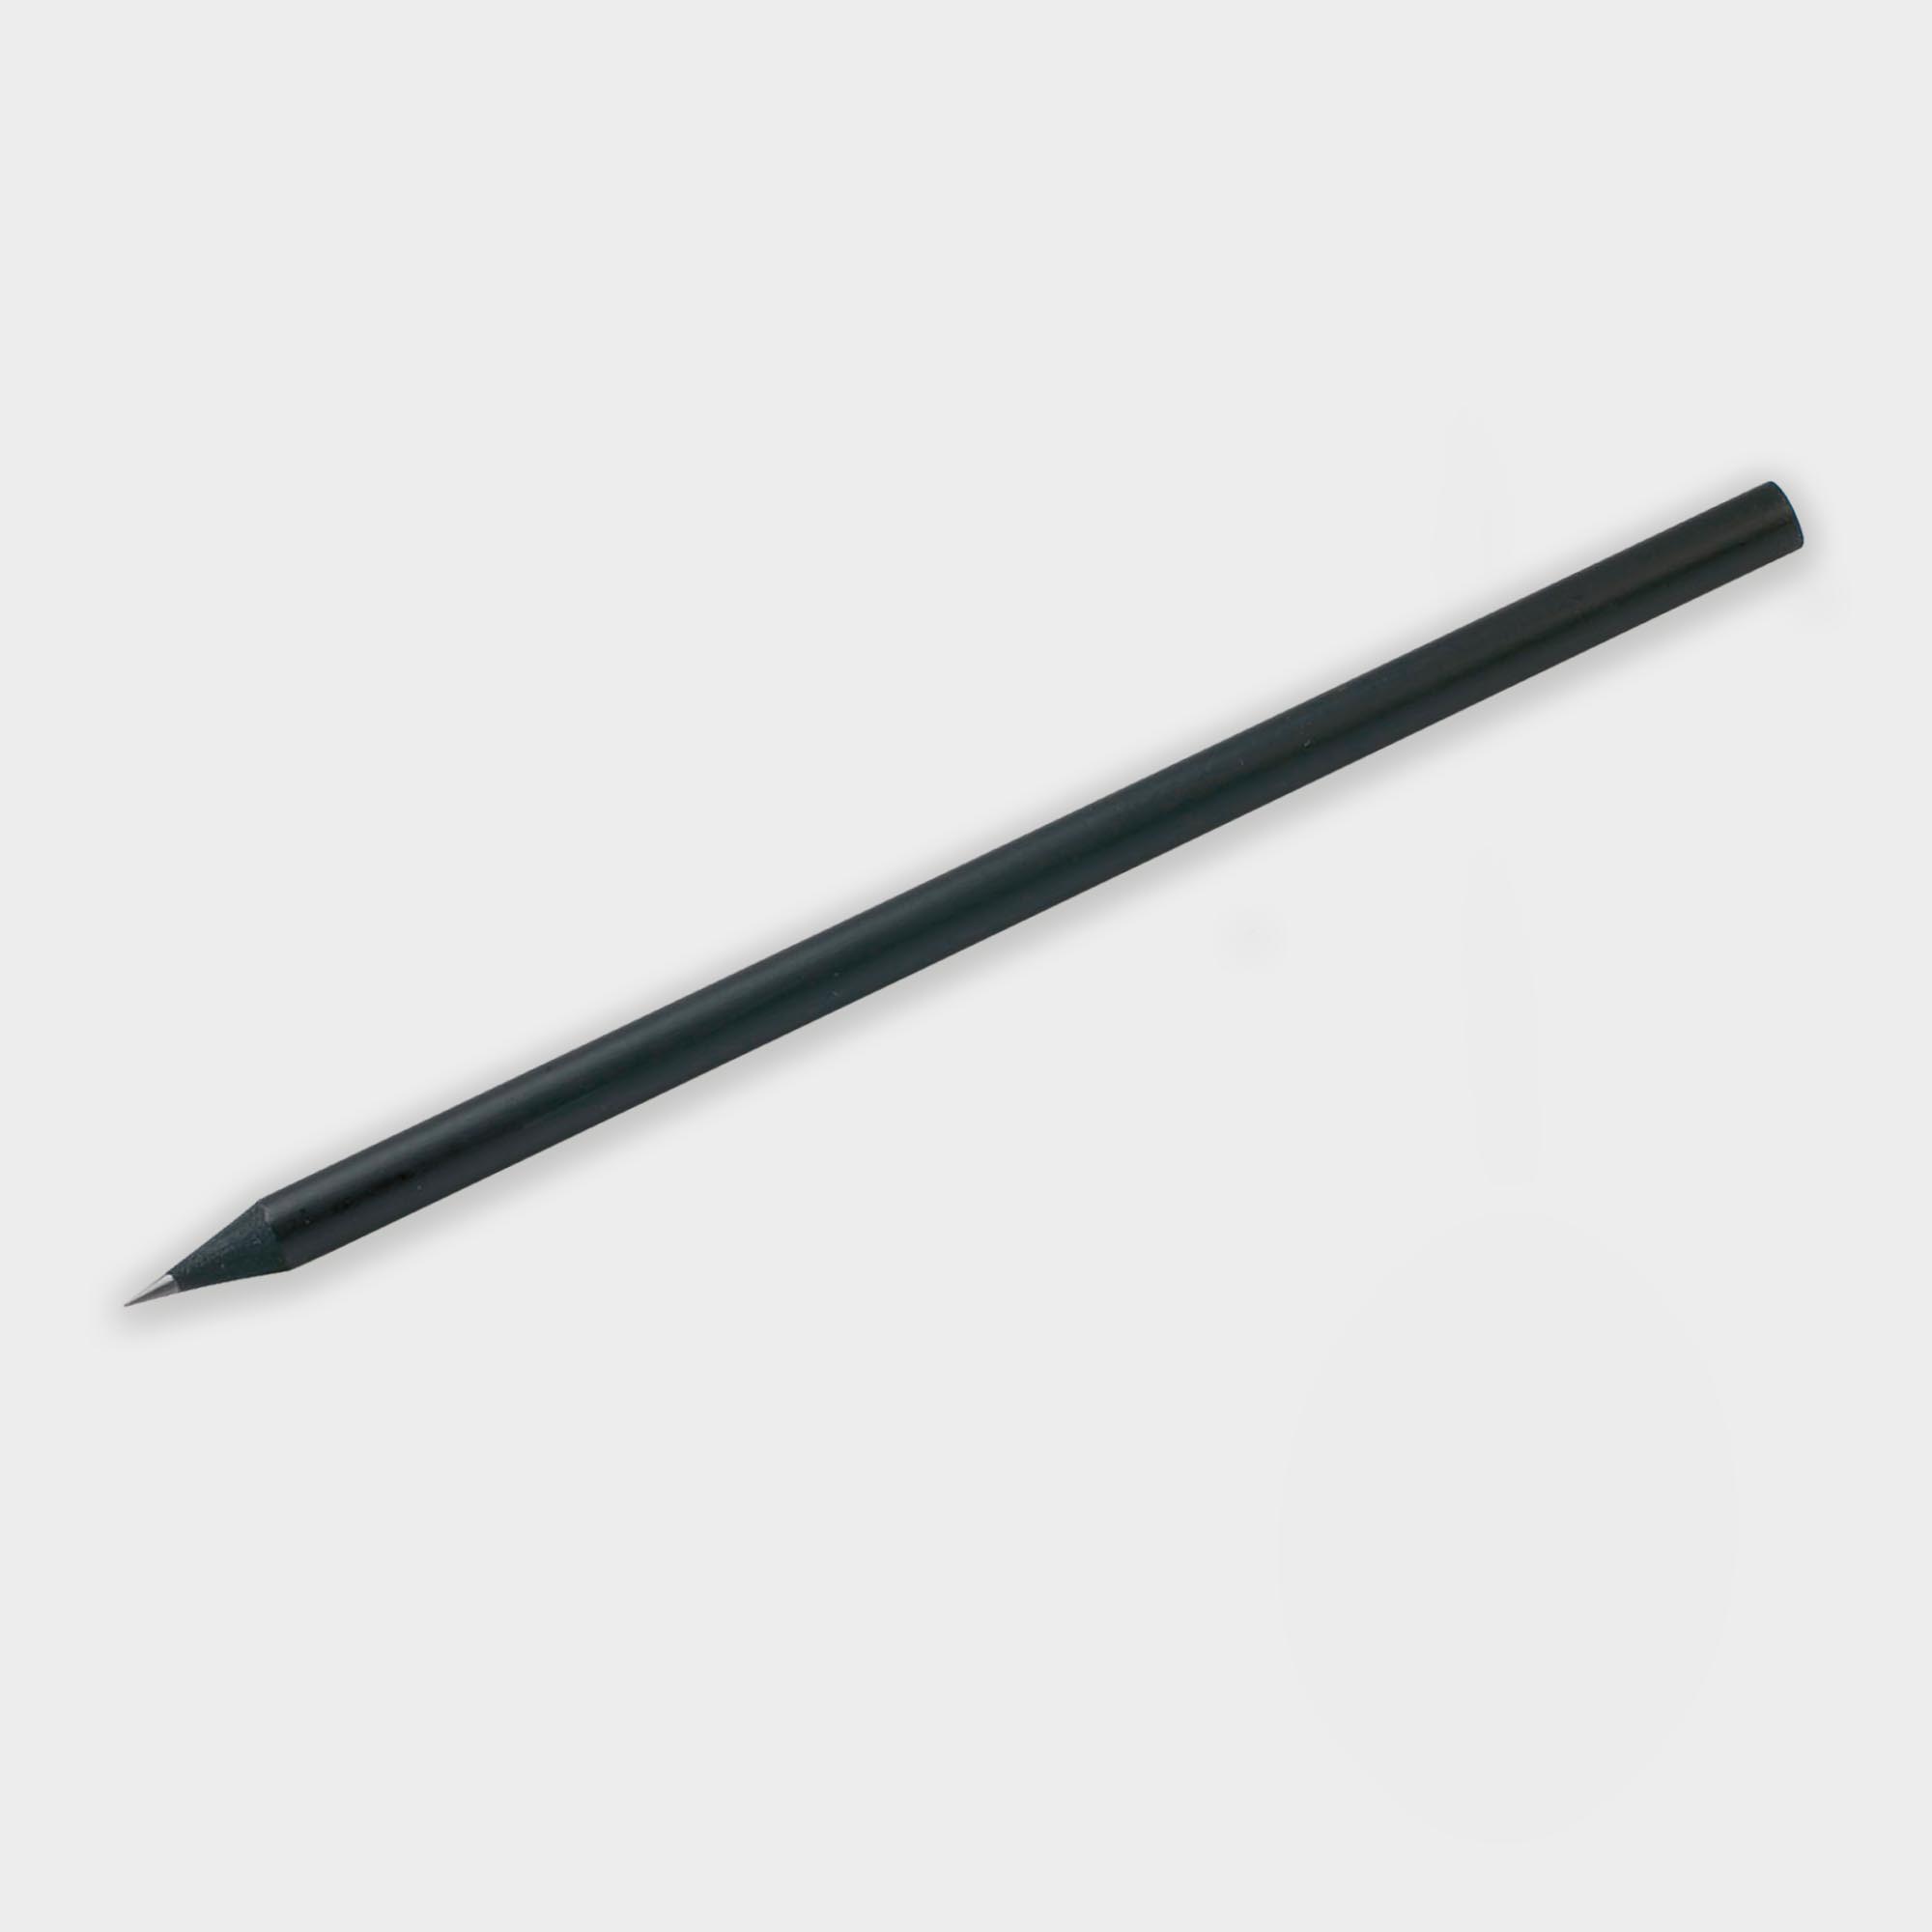 The Green & Good Black Pencil made from sustainable timber.  Wooden eco-pencil without eraser in a high quality matt black finish with HB lead. Black